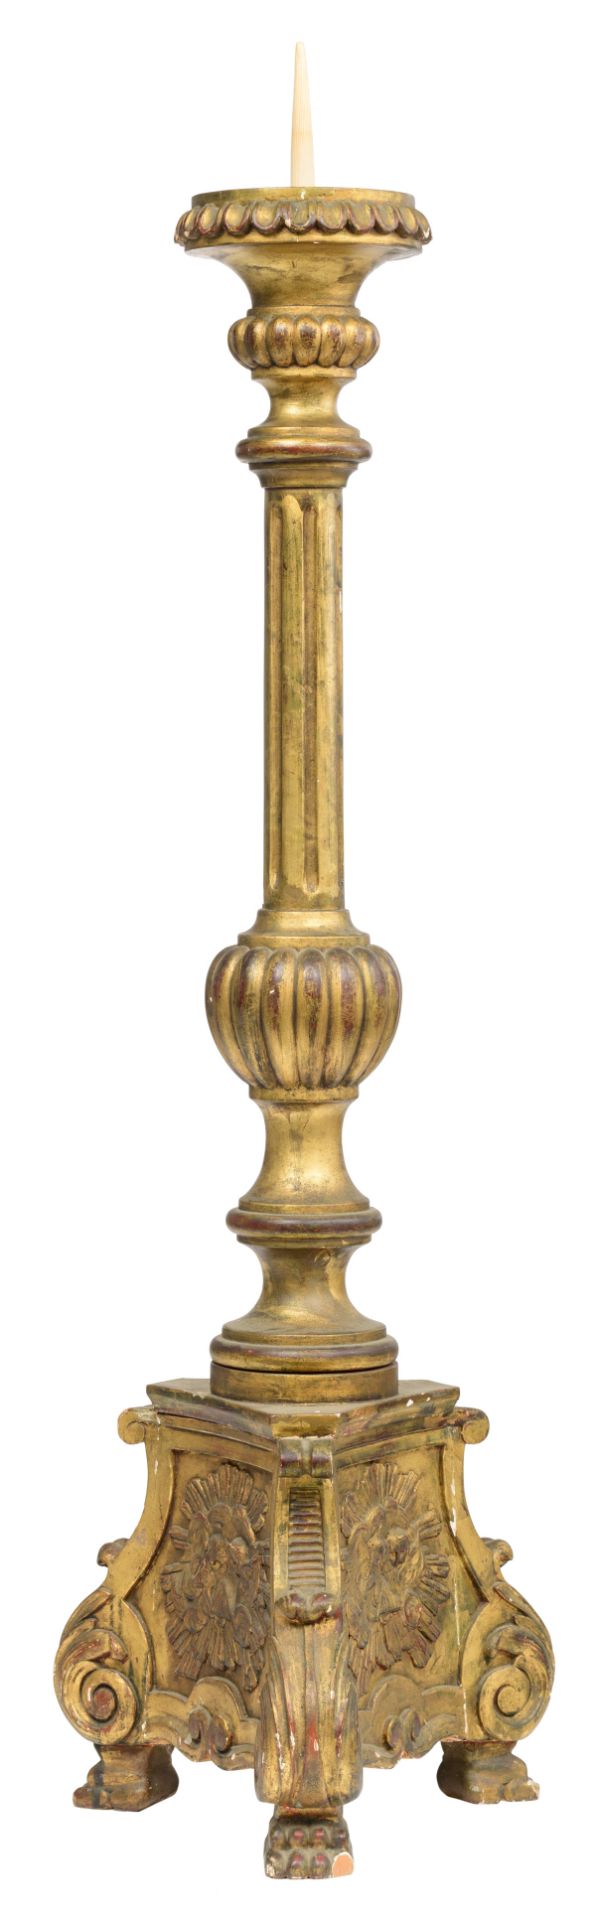 A large gilt wooden Baroque style altar candlestick, H 145 cm